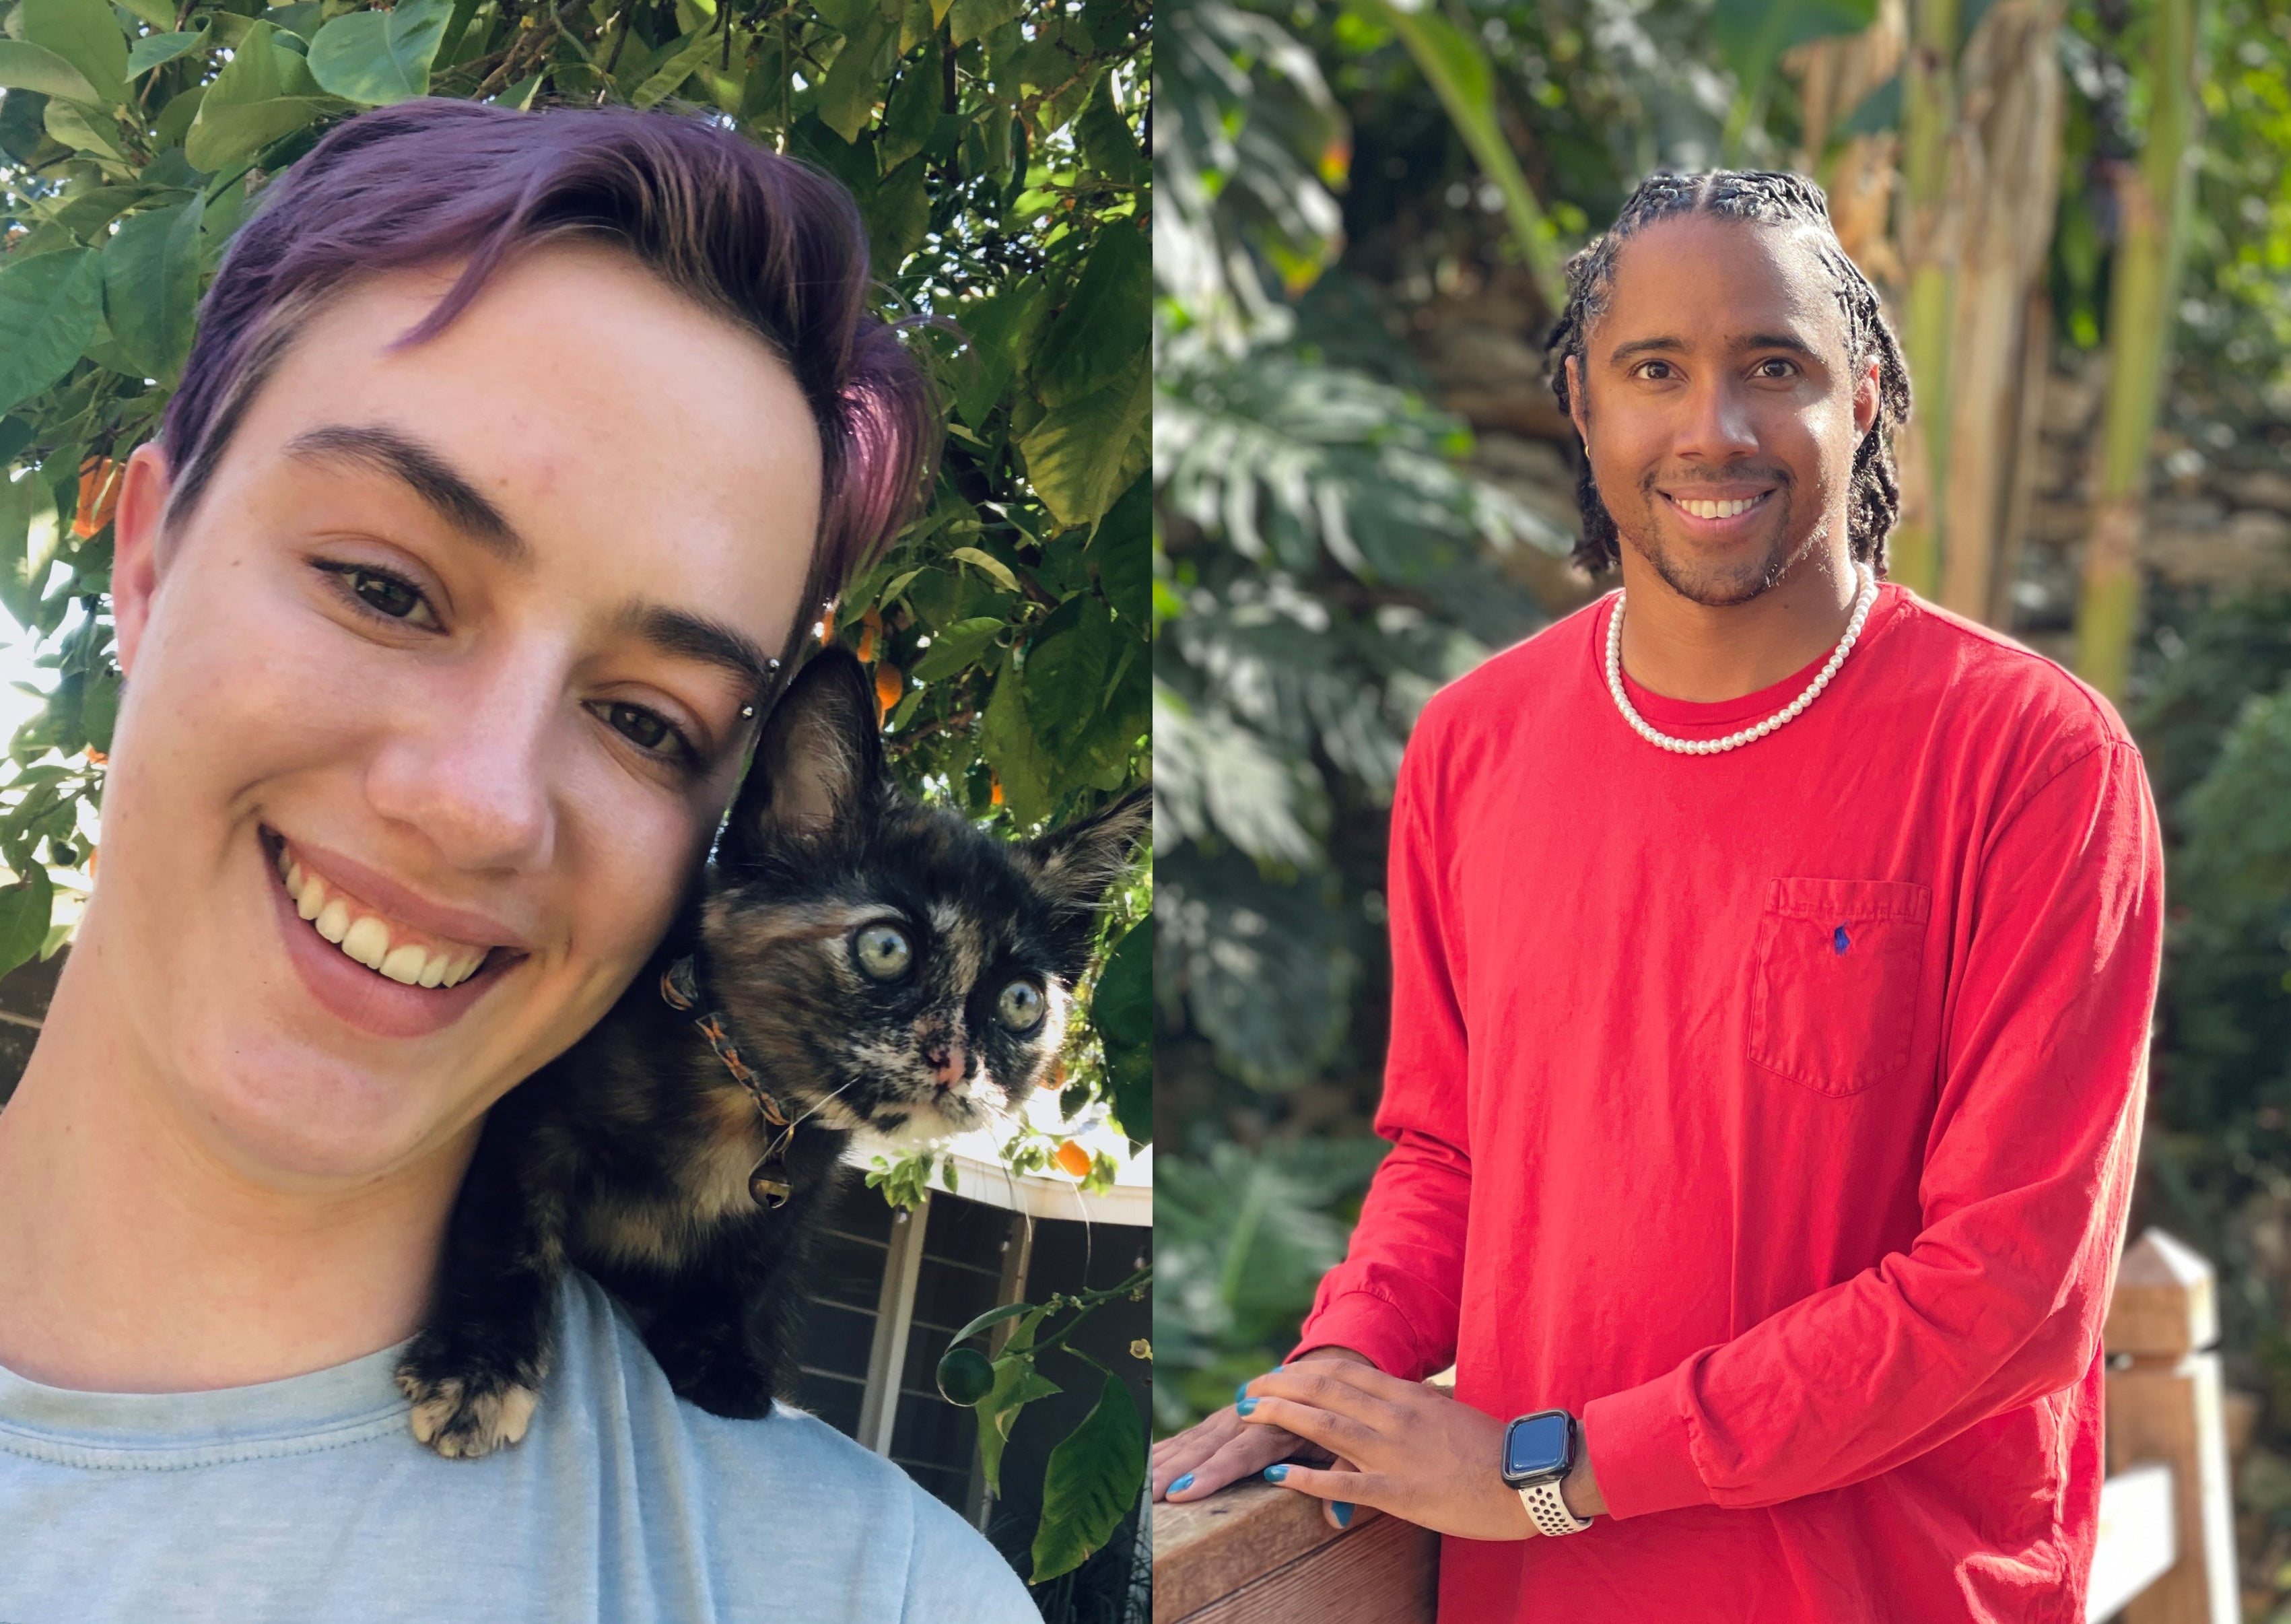 Two side-by-side headshots of people smiling in front of green plants.